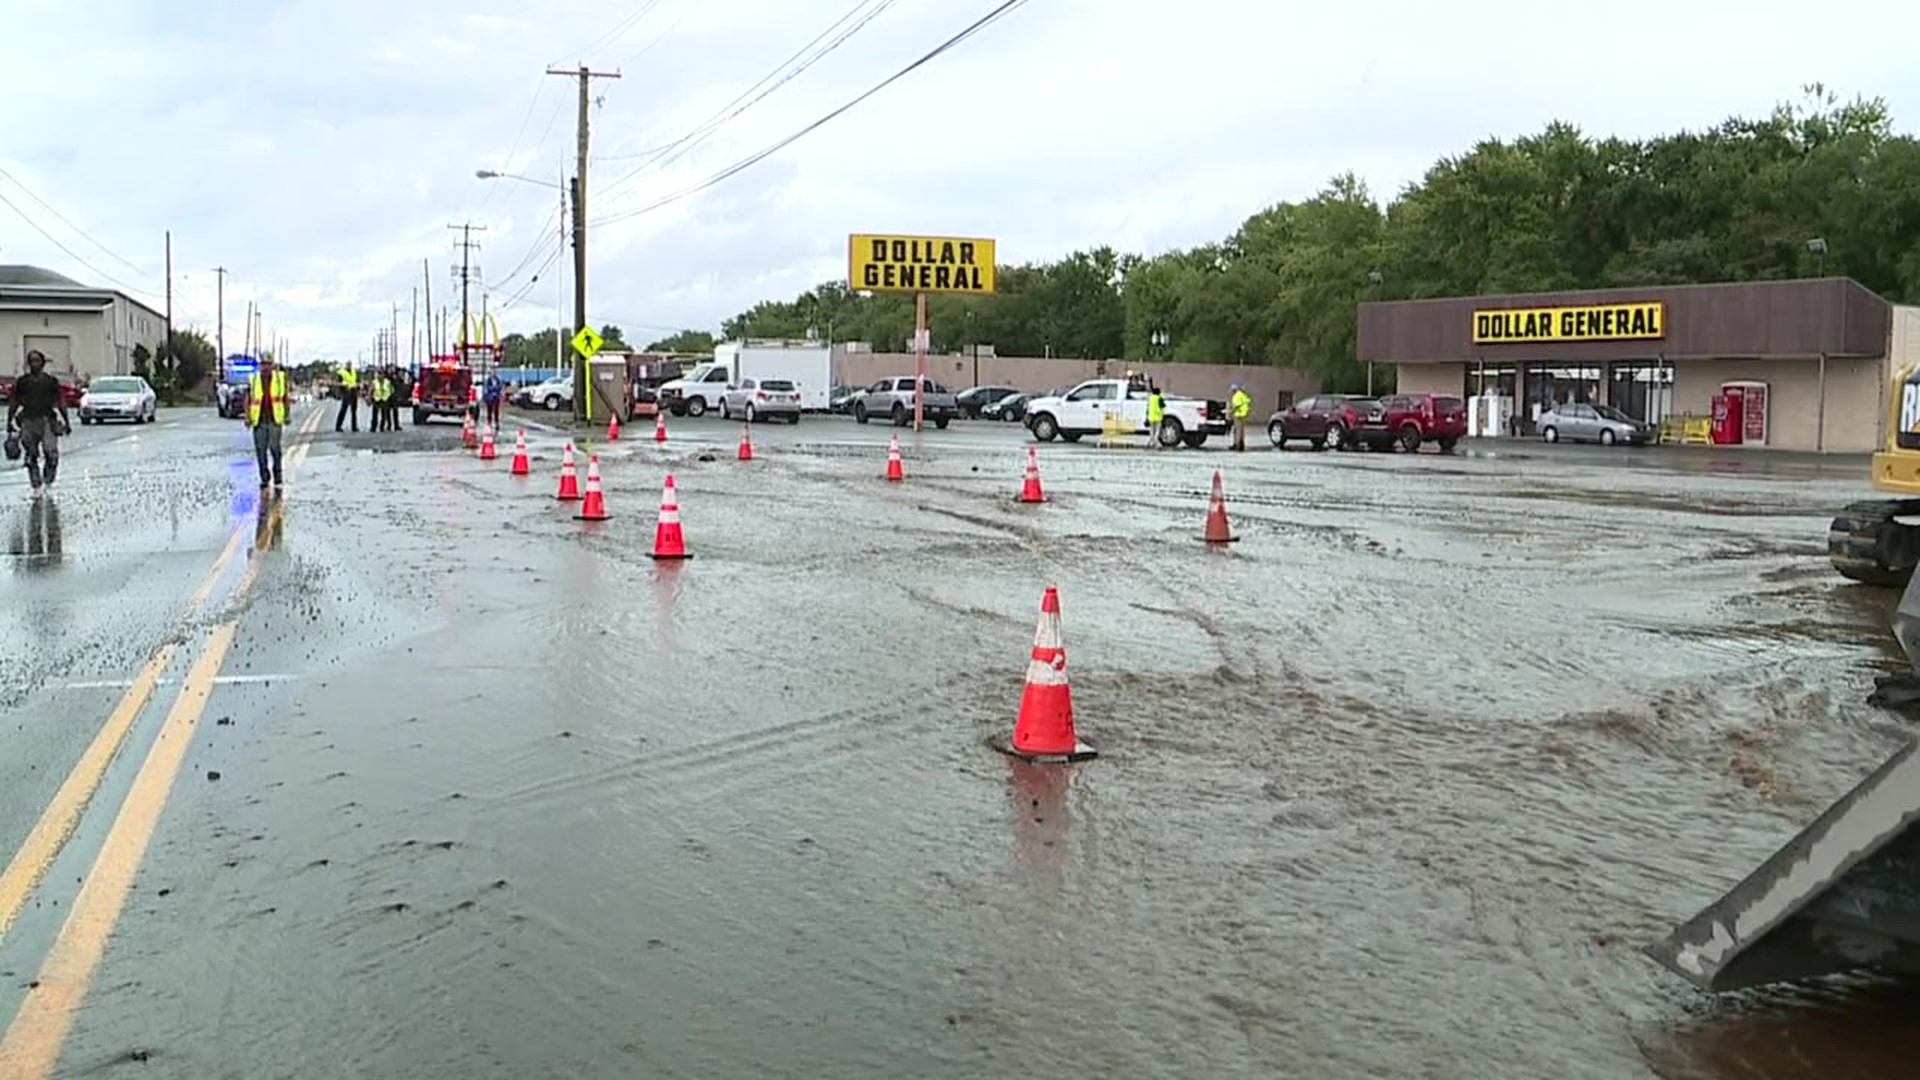 Crews from Pennsylvania American Water say 70 homes and businesses were impacted, including nearby schools.